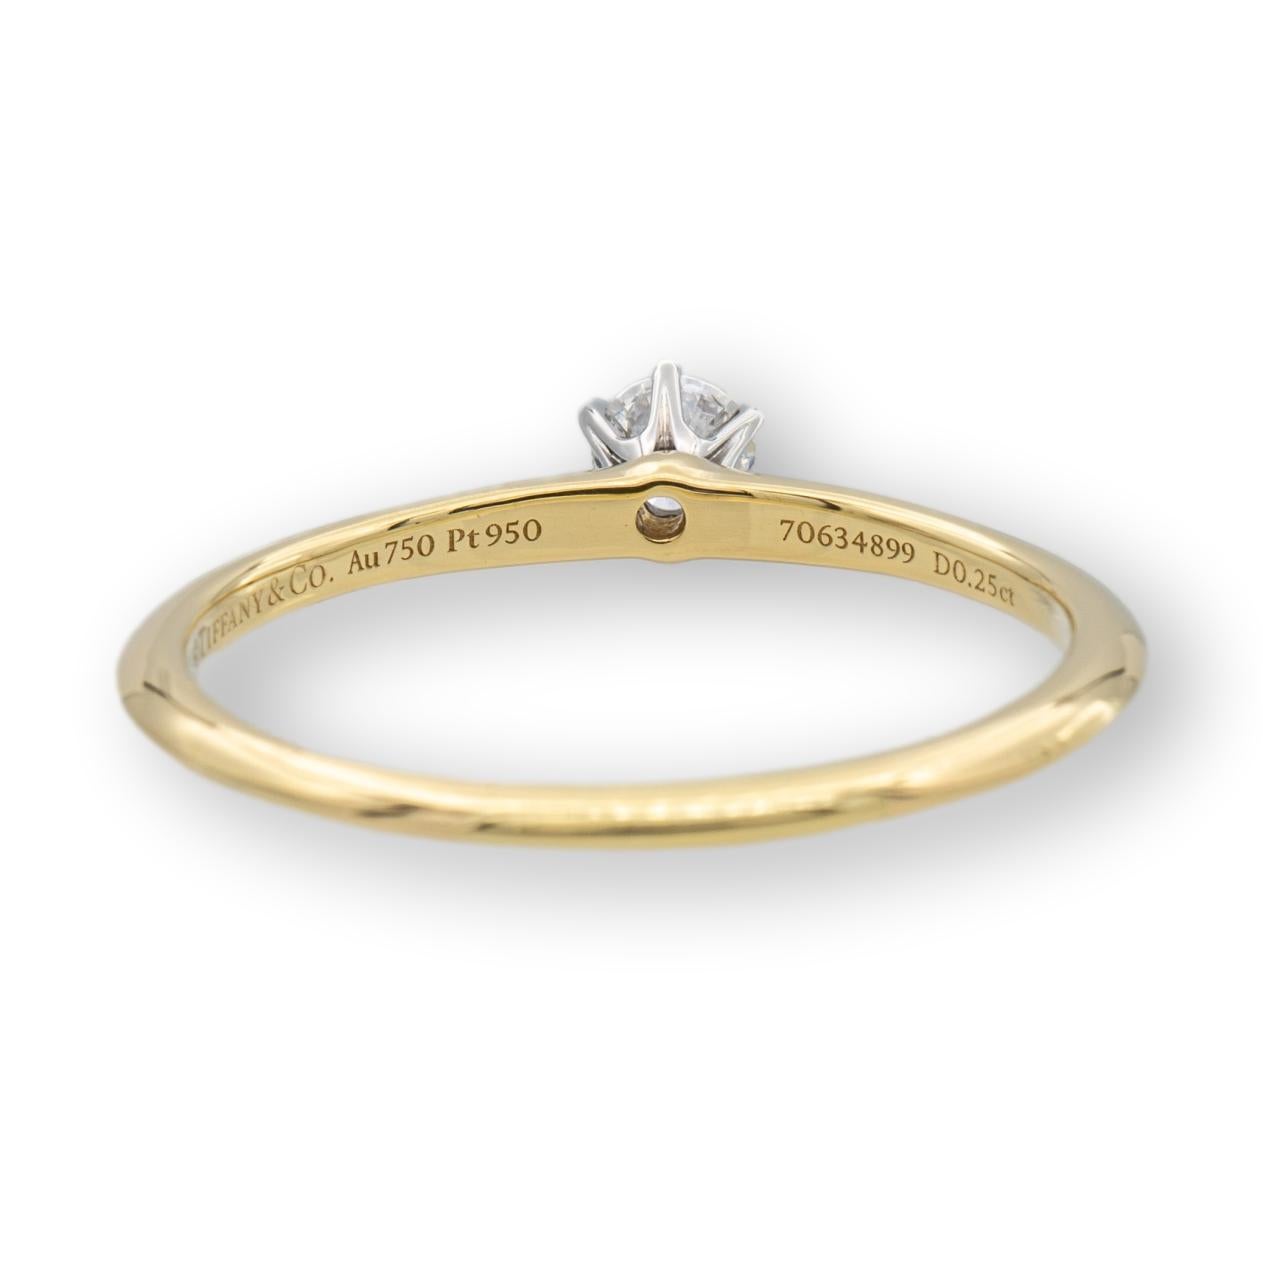 Tiffany & Co. classic solitaire engagement ring finely crafted in 18 karat yellow gold featuring a round brilliant diamond center weighing .25 cts  F color , Fine VVS2 clarity set in a platinum 6 prong basket setting. Diamond is considered triple X